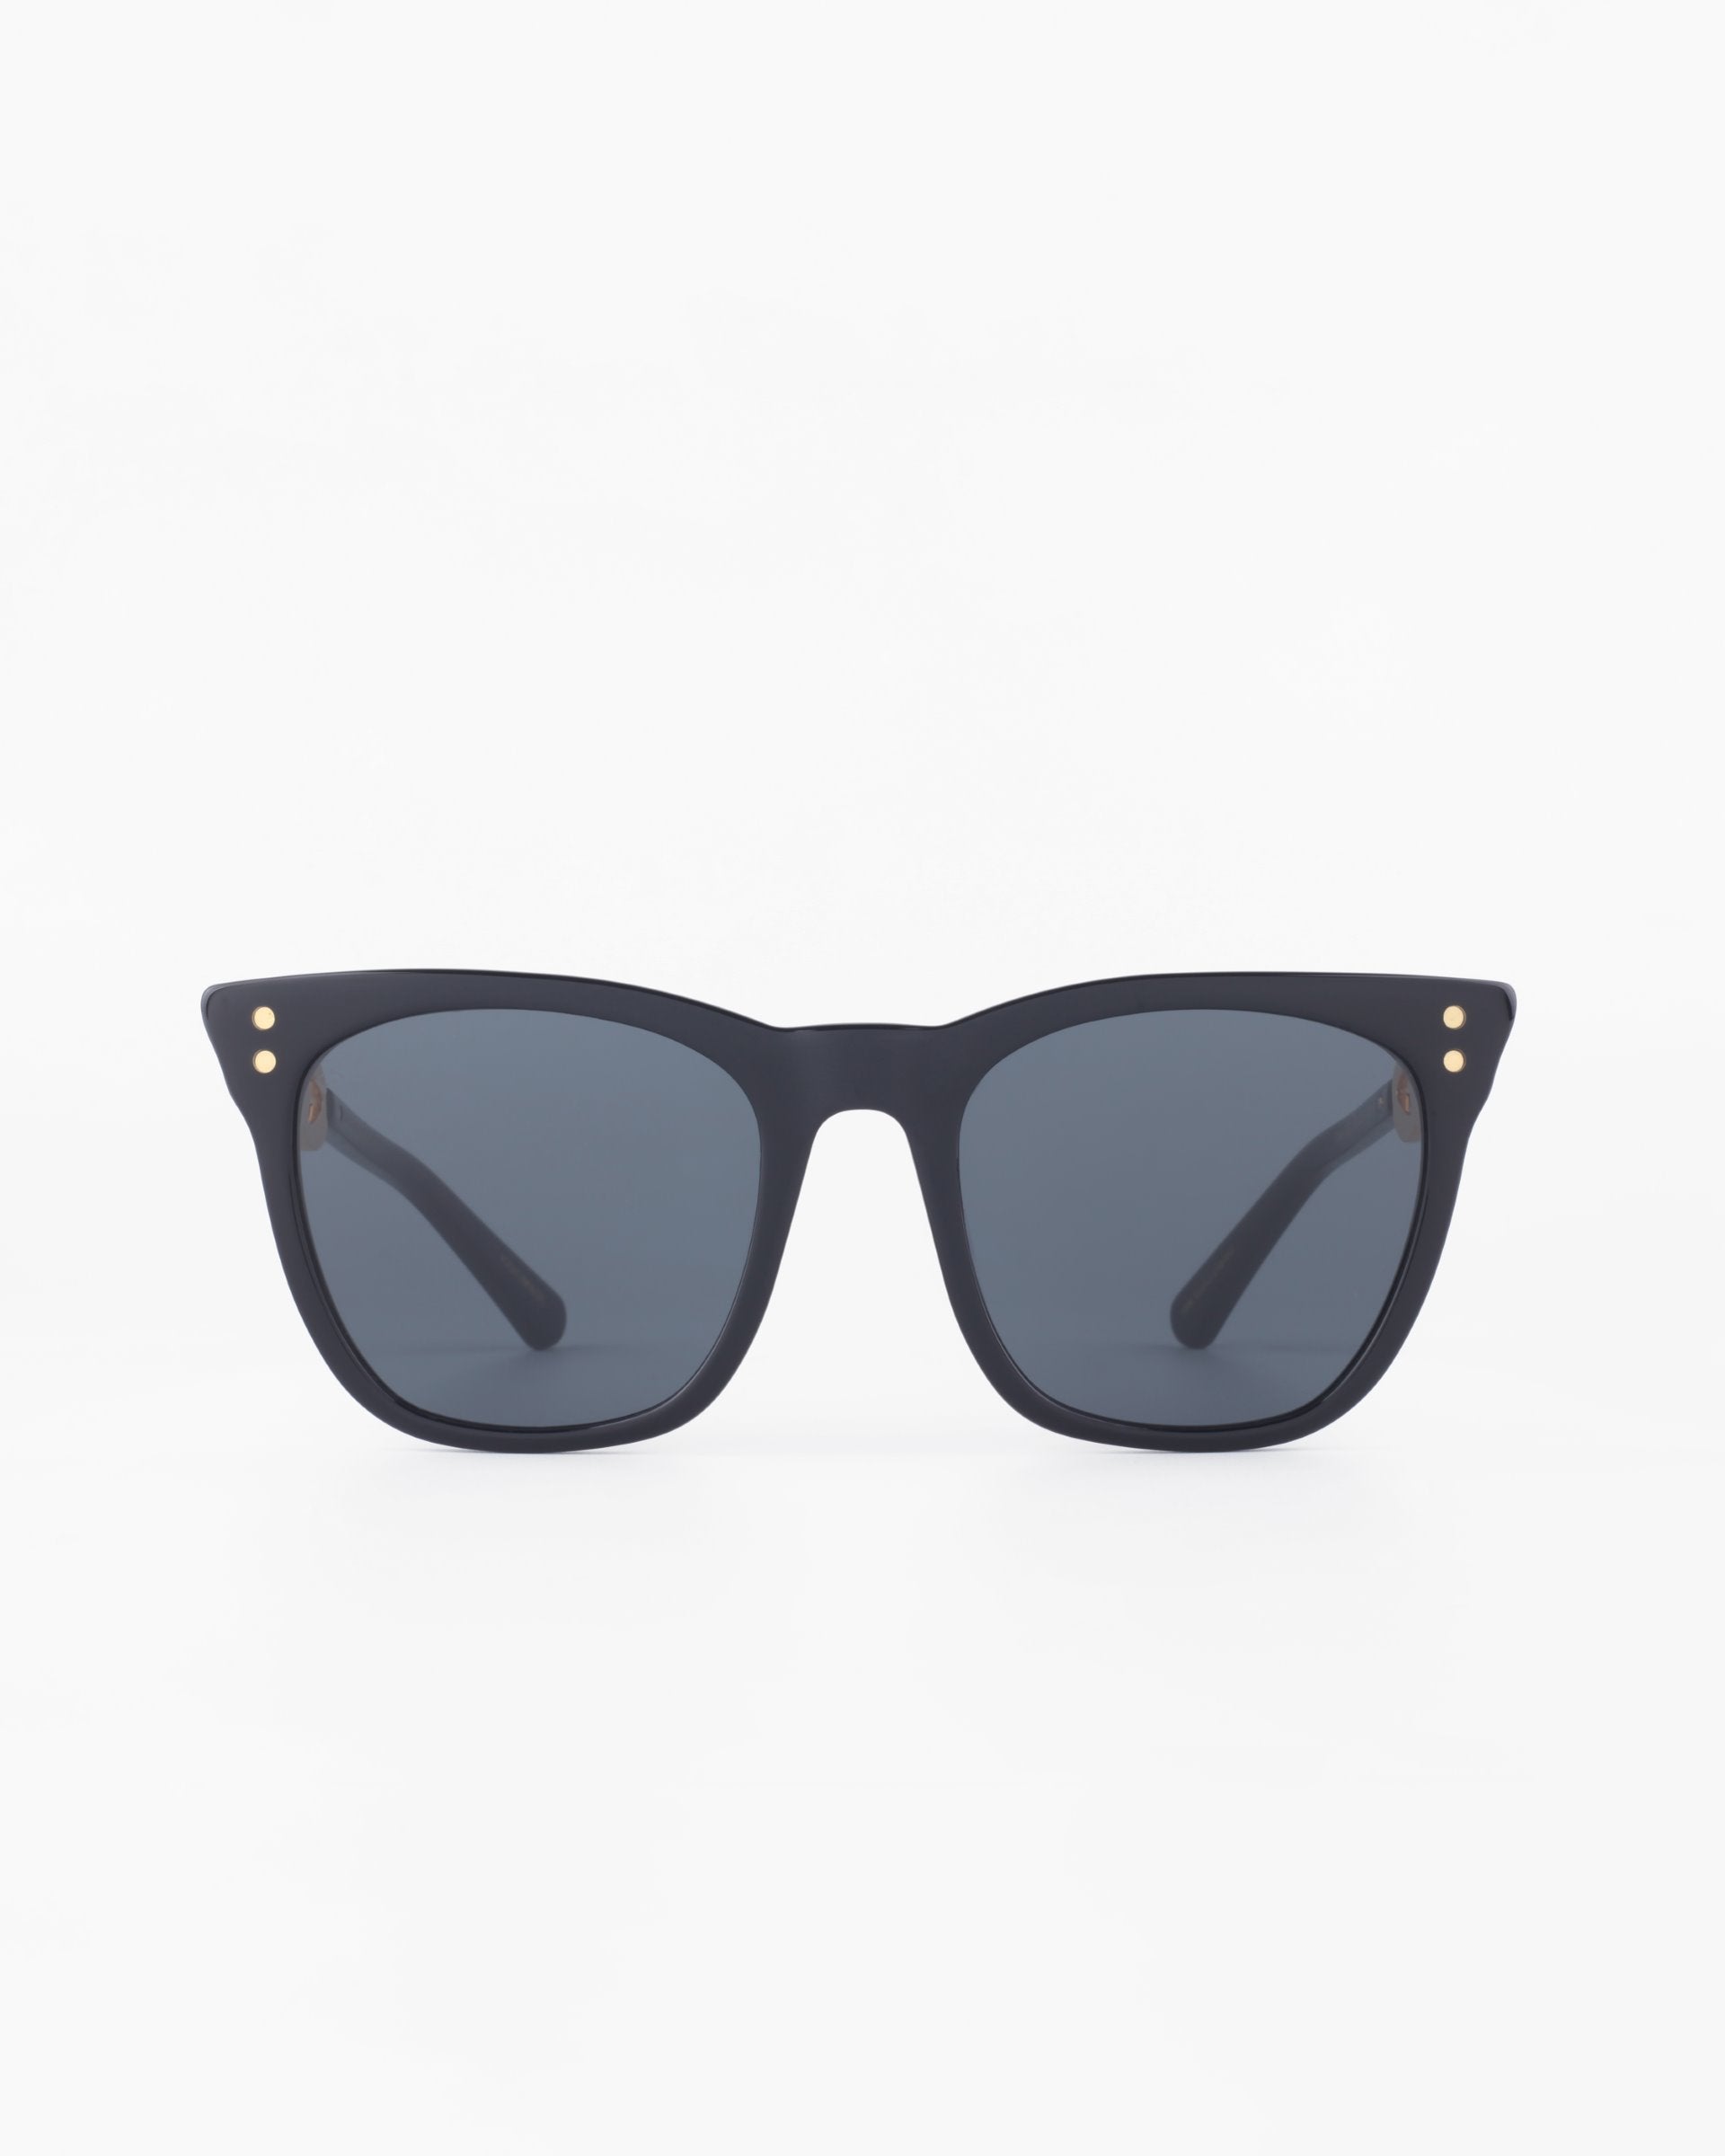 A pair of black square-frame acetate sunglasses with dark lenses. The Deco sunglasses by For Art's Sake® have three small dot accents on each corner of the frame. The background is plain white.